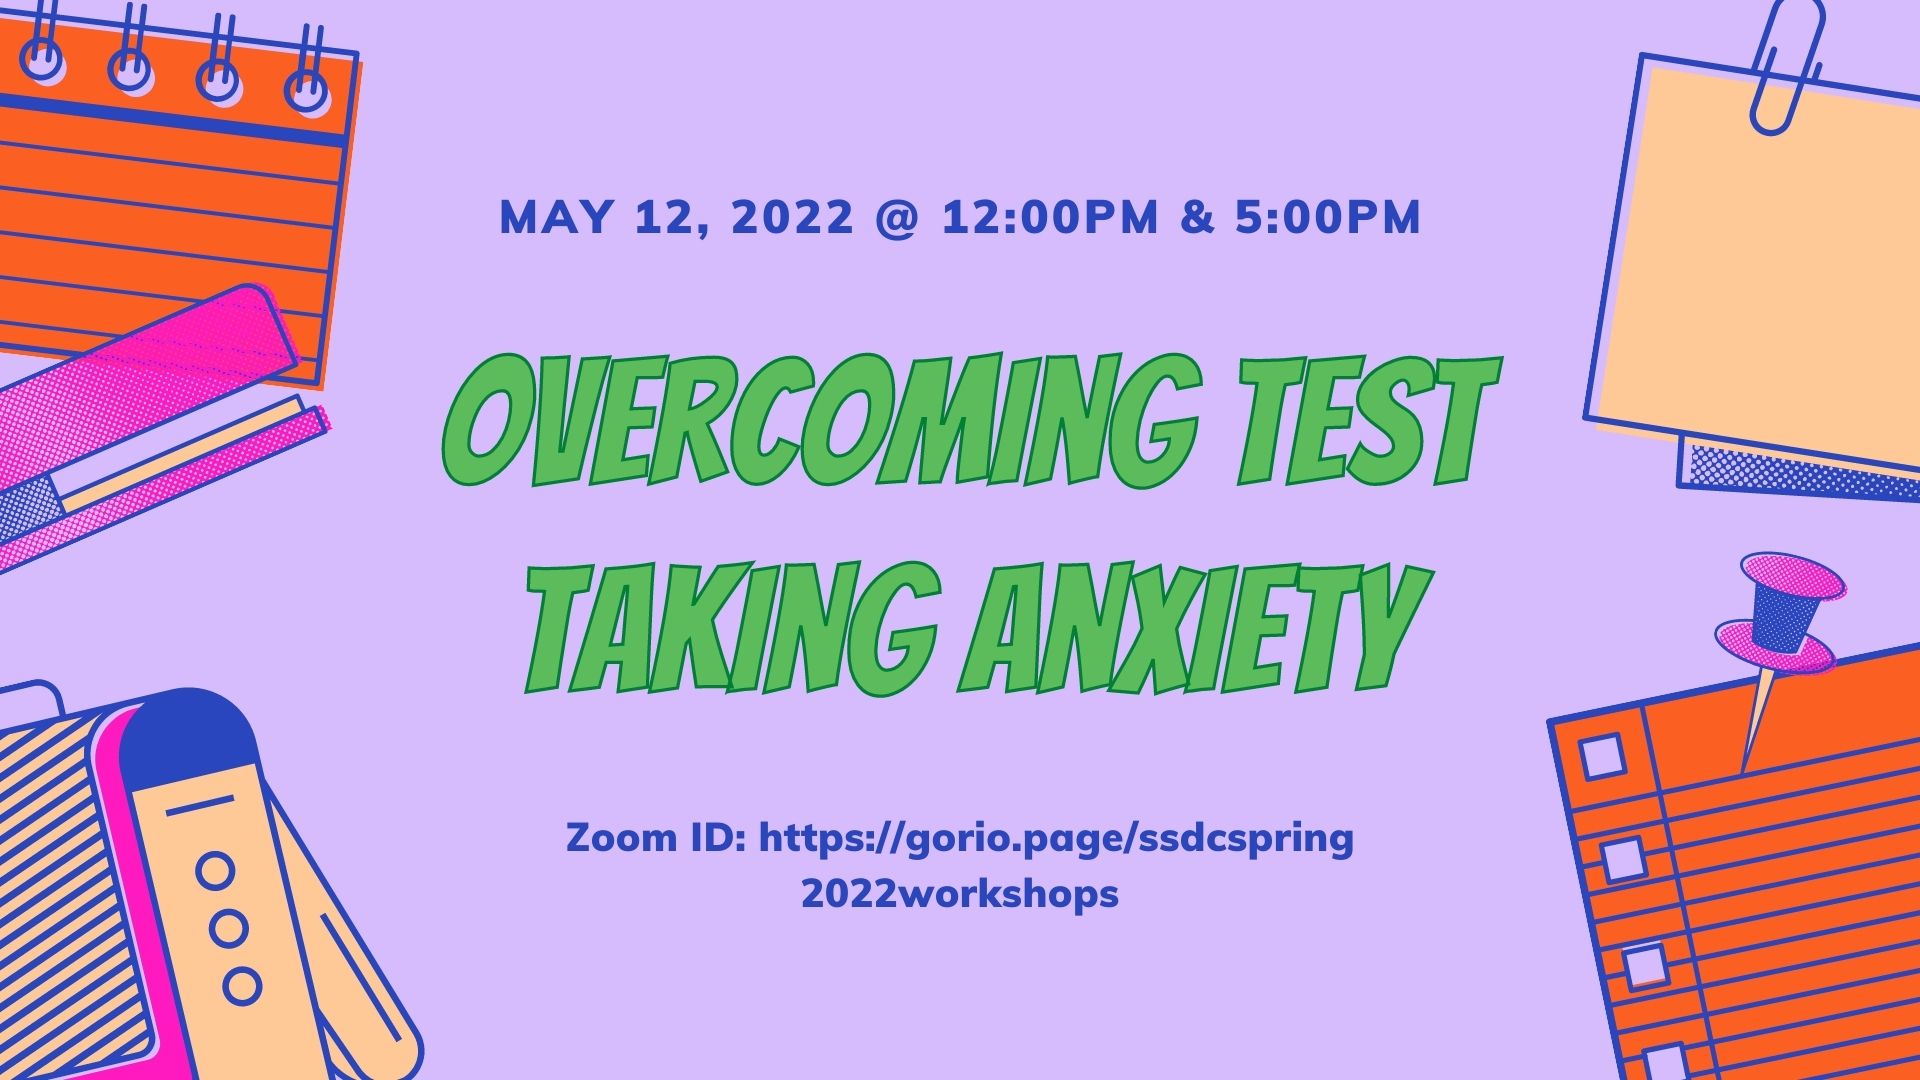 Overcoming Test Taking anxiety workshop flyer